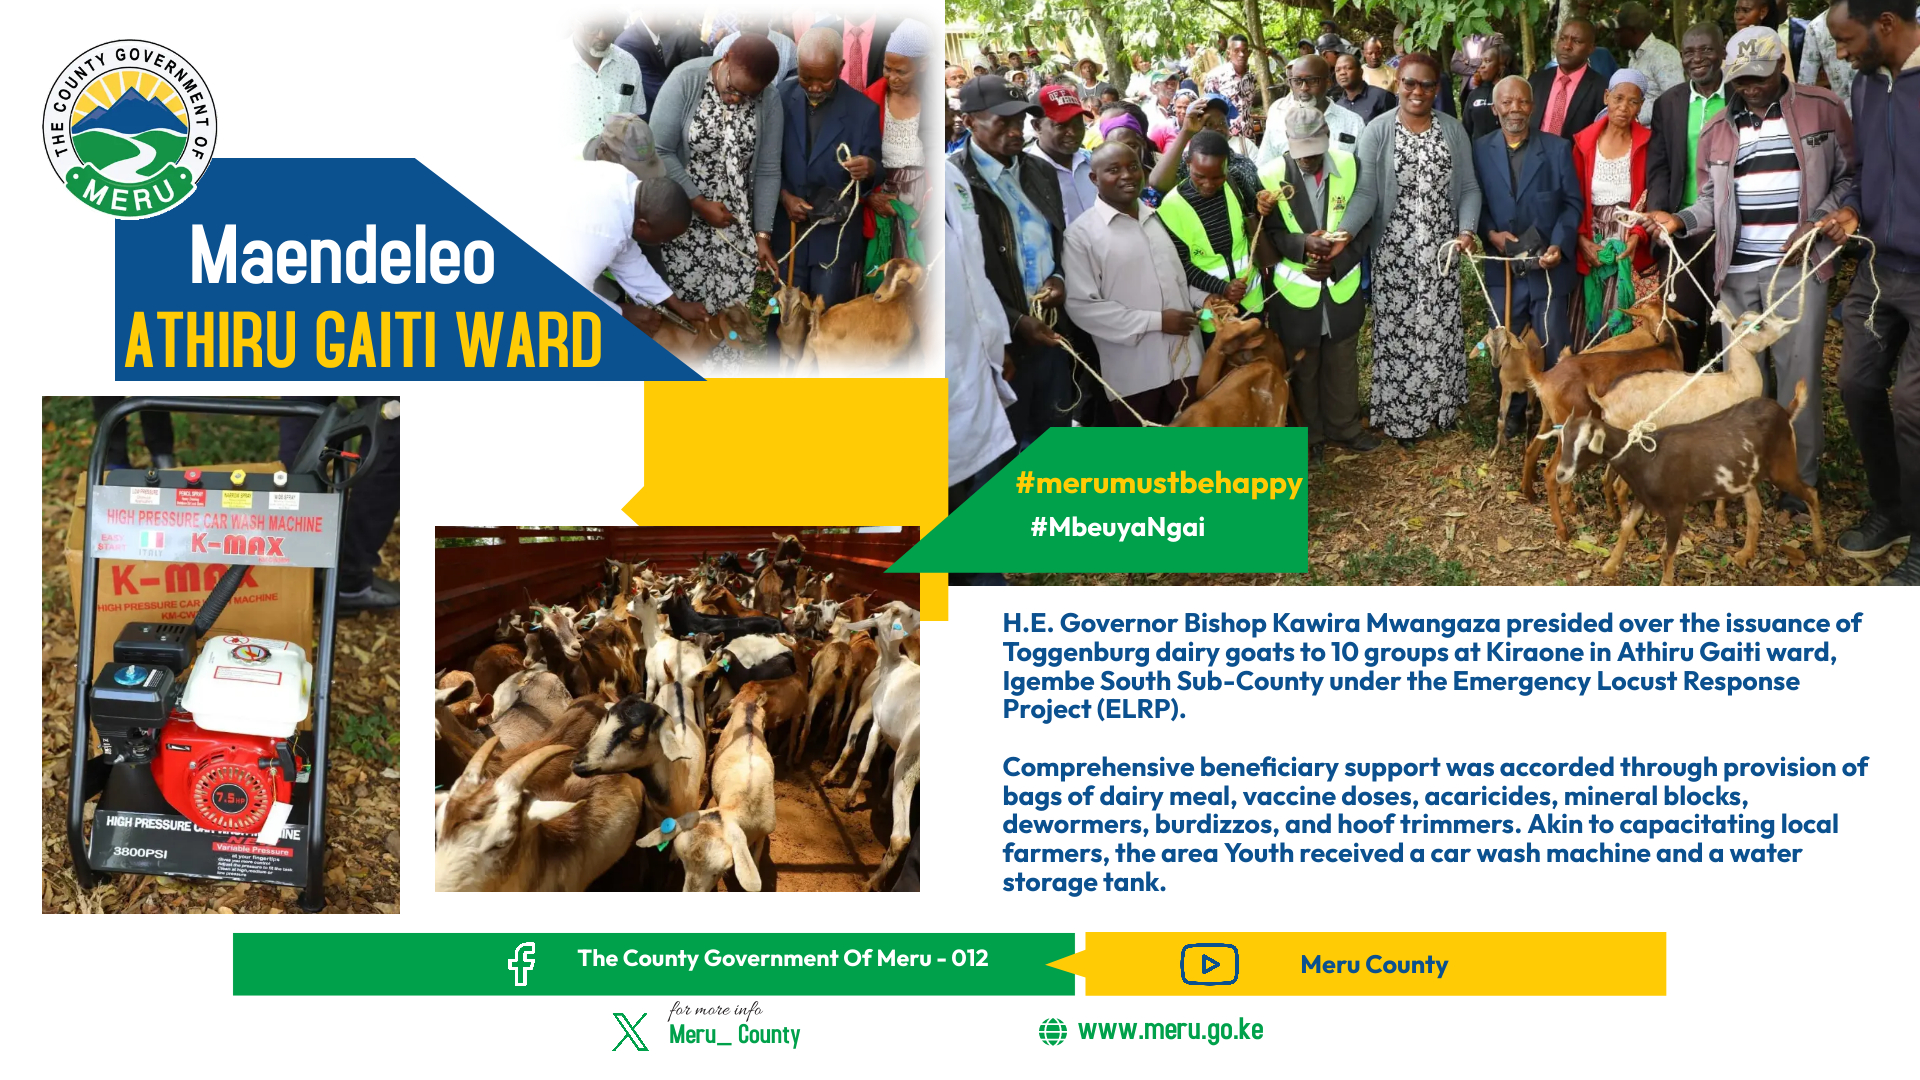 Presiding Over the Issuance of Toggenburg Dairy Goats: H.E Governor Bishop Kawira Mwangaza at Kiraone, Athiru Gaiti Ward, Igembe South Sub-County, under the Emergency Locust Response Project (ELRP)